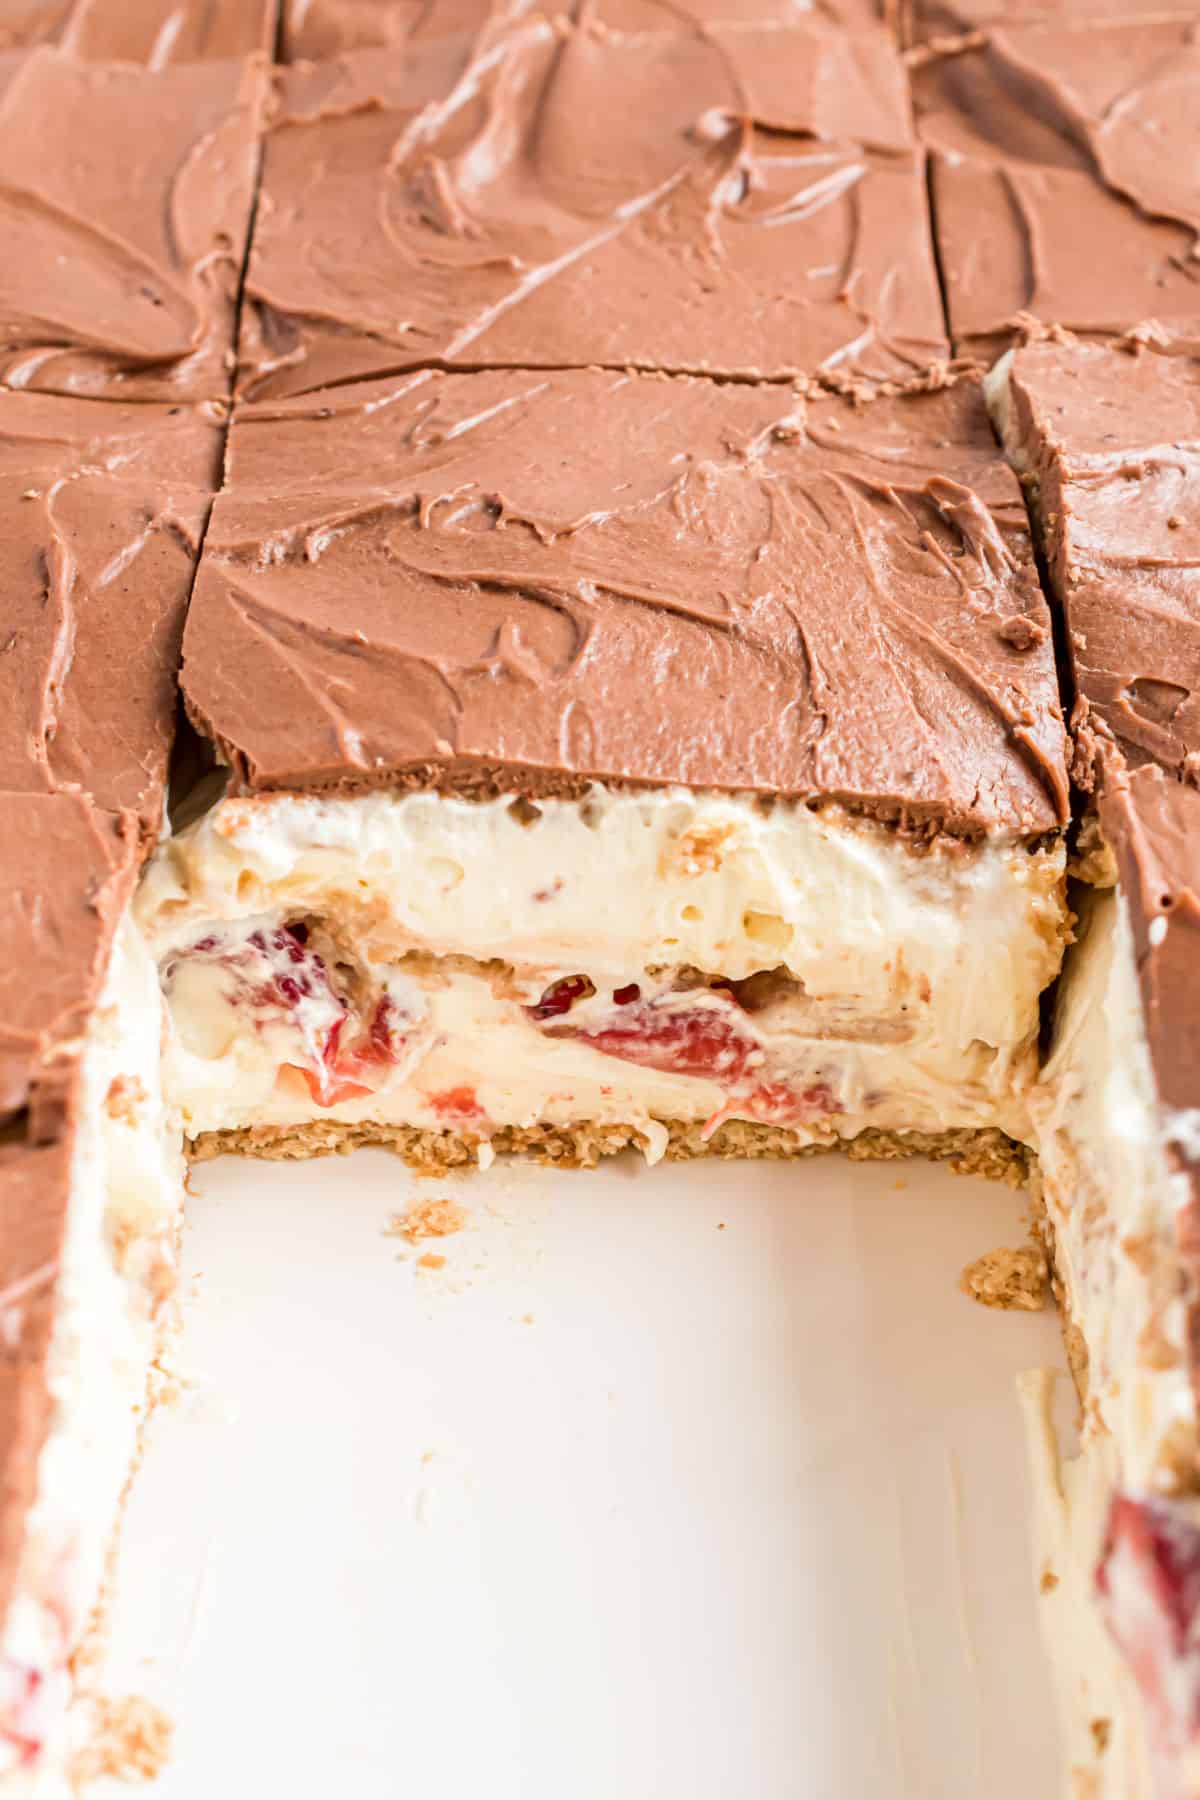 Strawberry eclair cake with one slice removed out of baking dish.